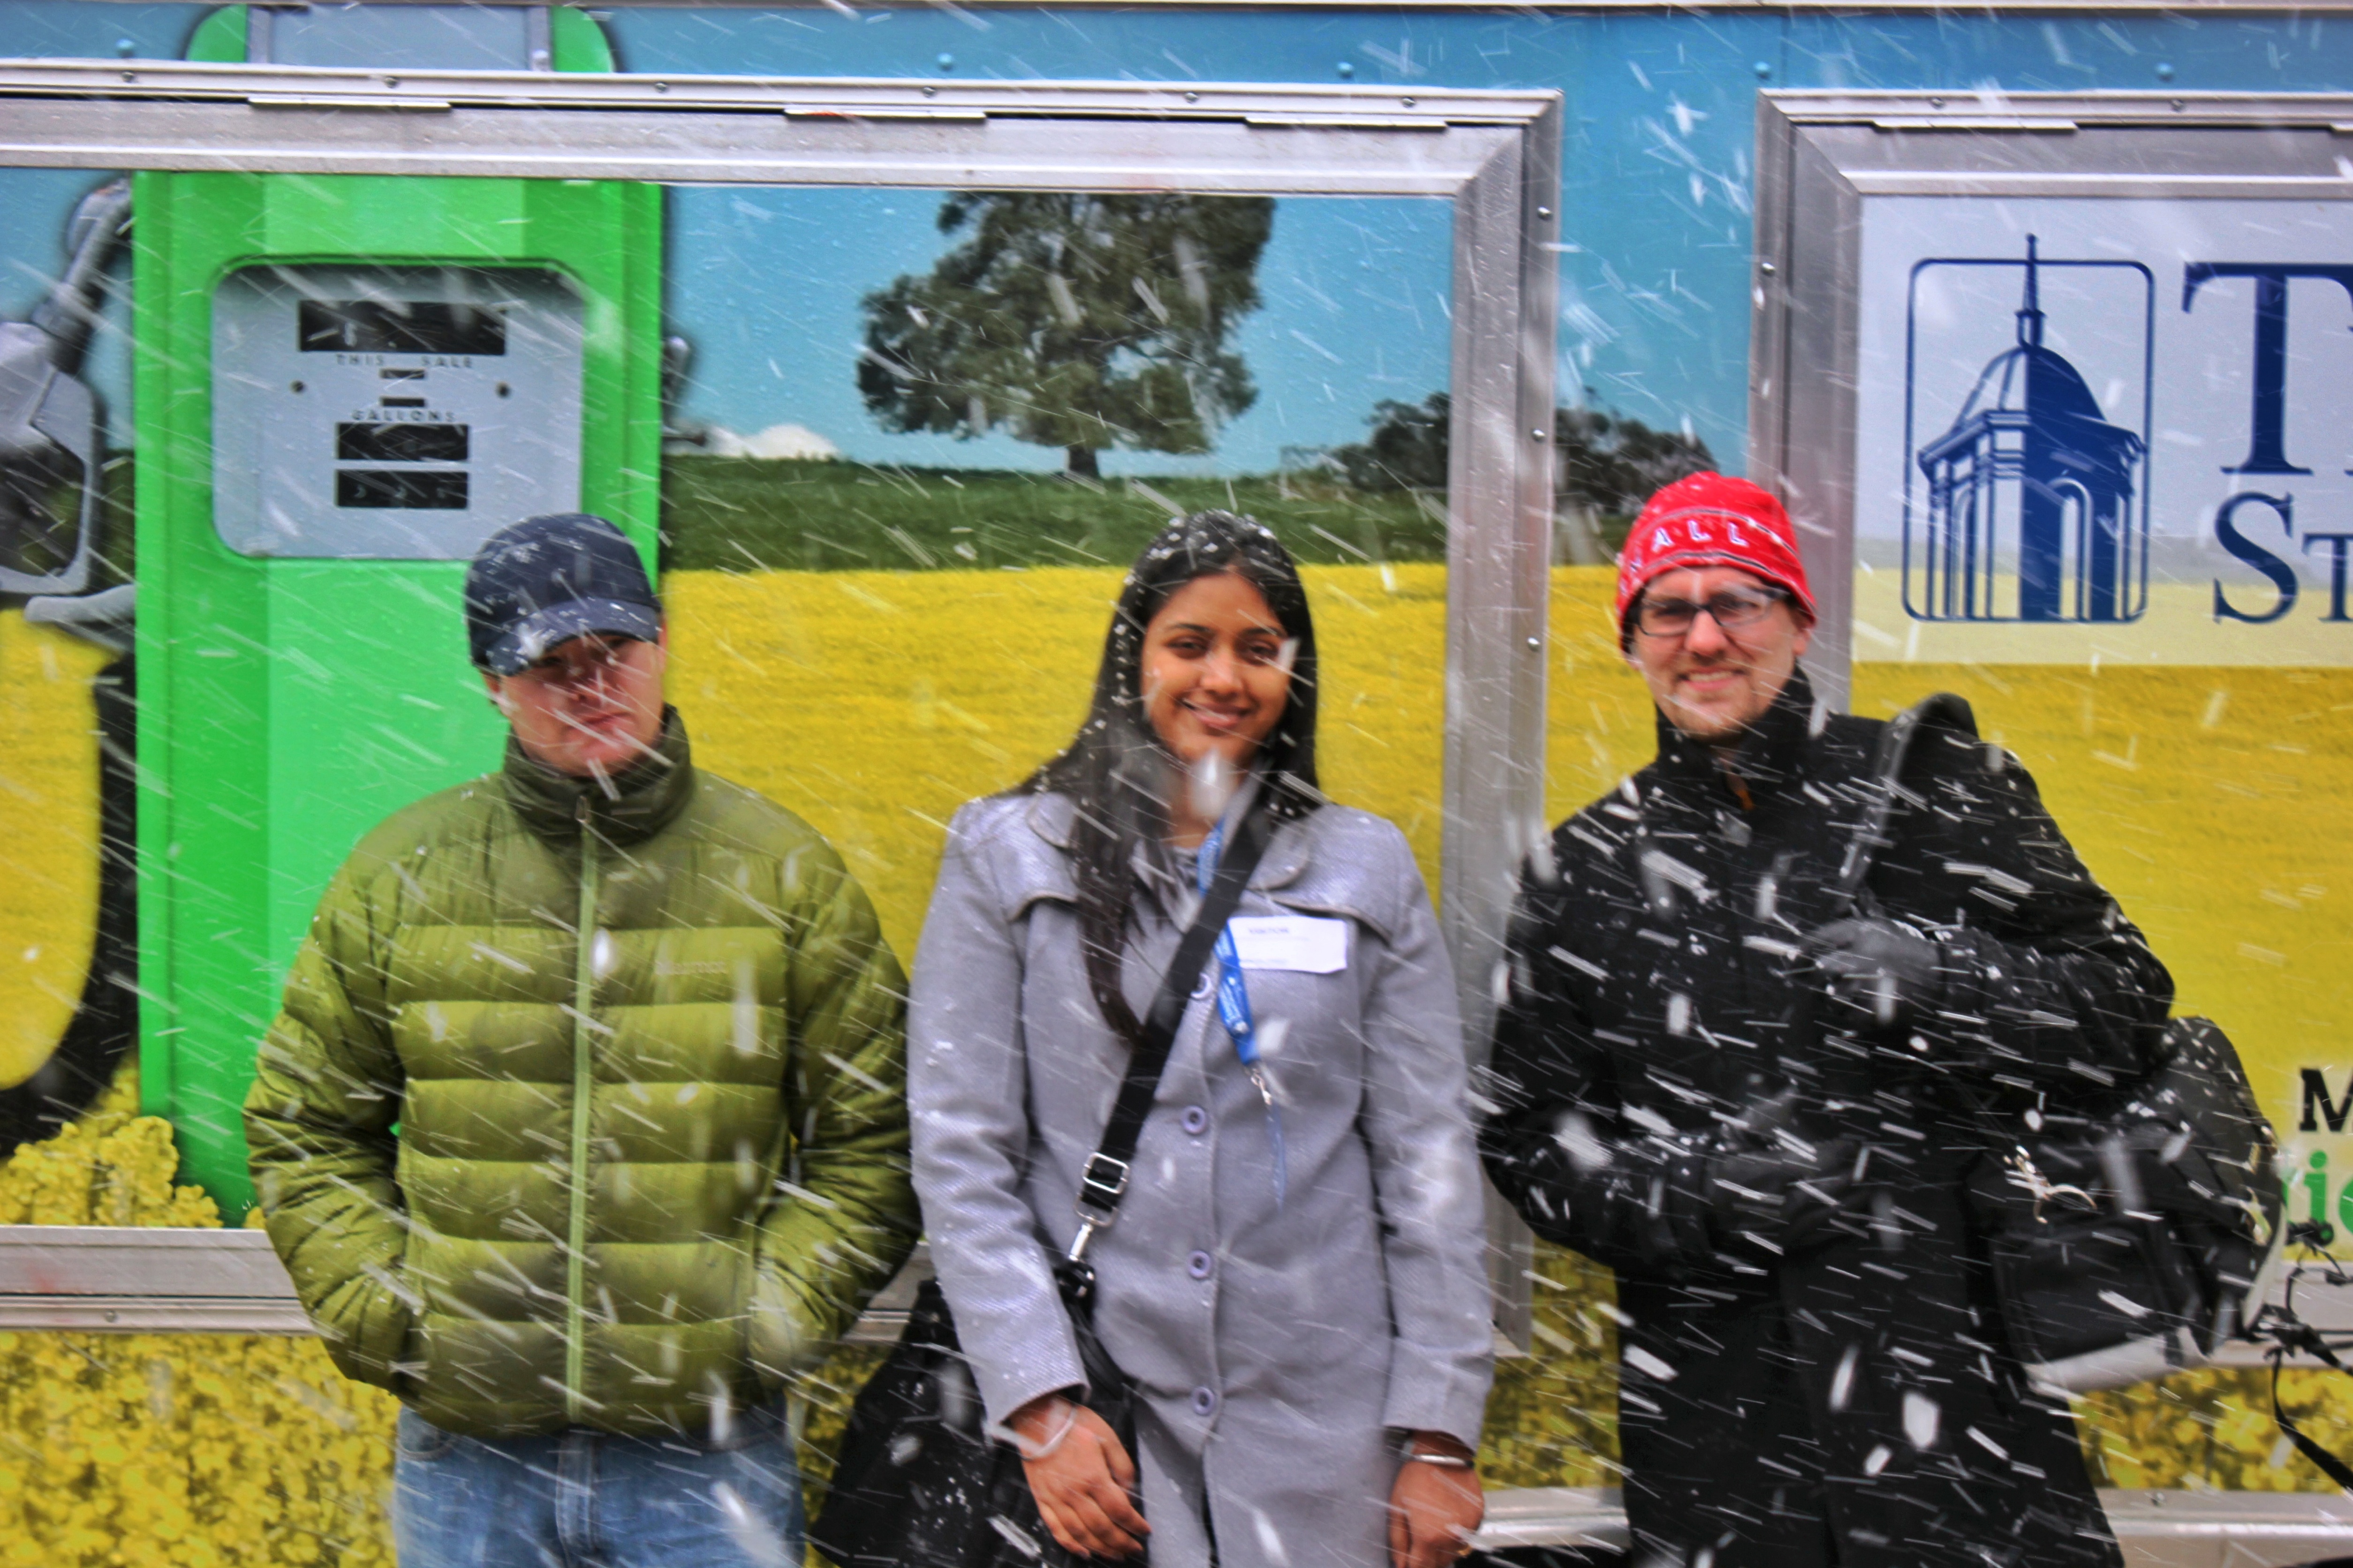 Ag Day on the Hill with snow flurries